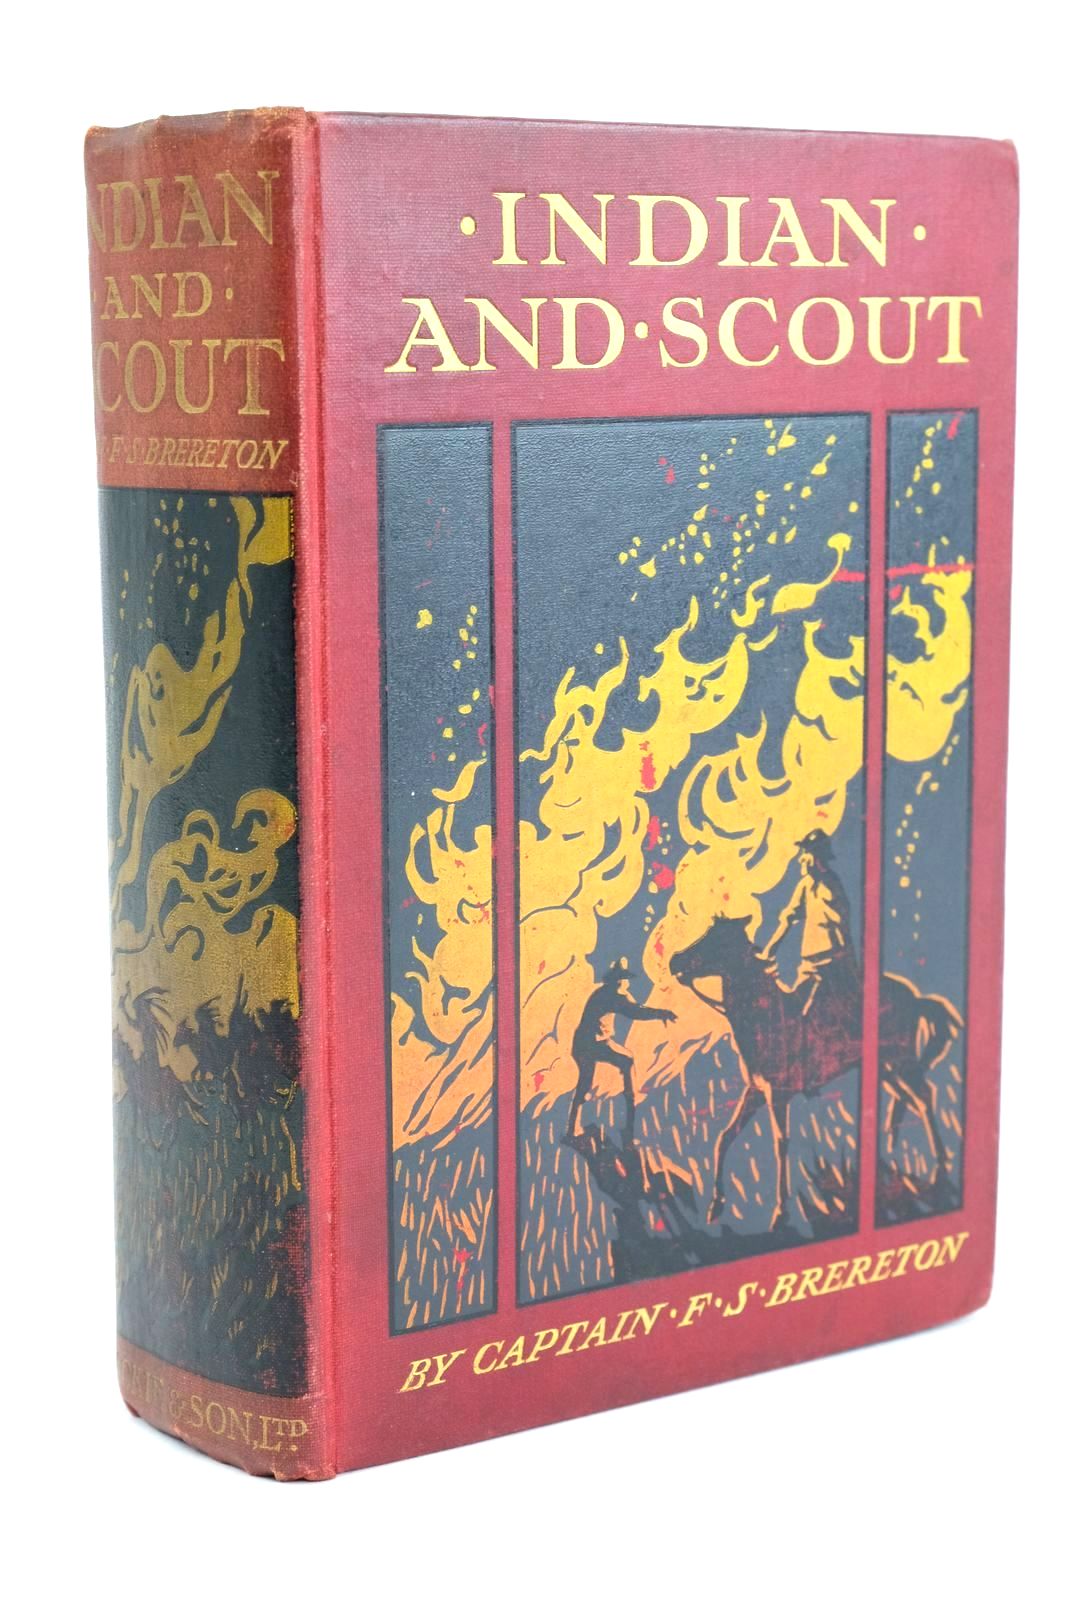 Photo of INDIAN AND SCOUT written by Brereton, F.S. illustrated by Cuneo, Cyrus published by Blackie & Son Ltd. (STOCK CODE: 1324437)  for sale by Stella & Rose's Books